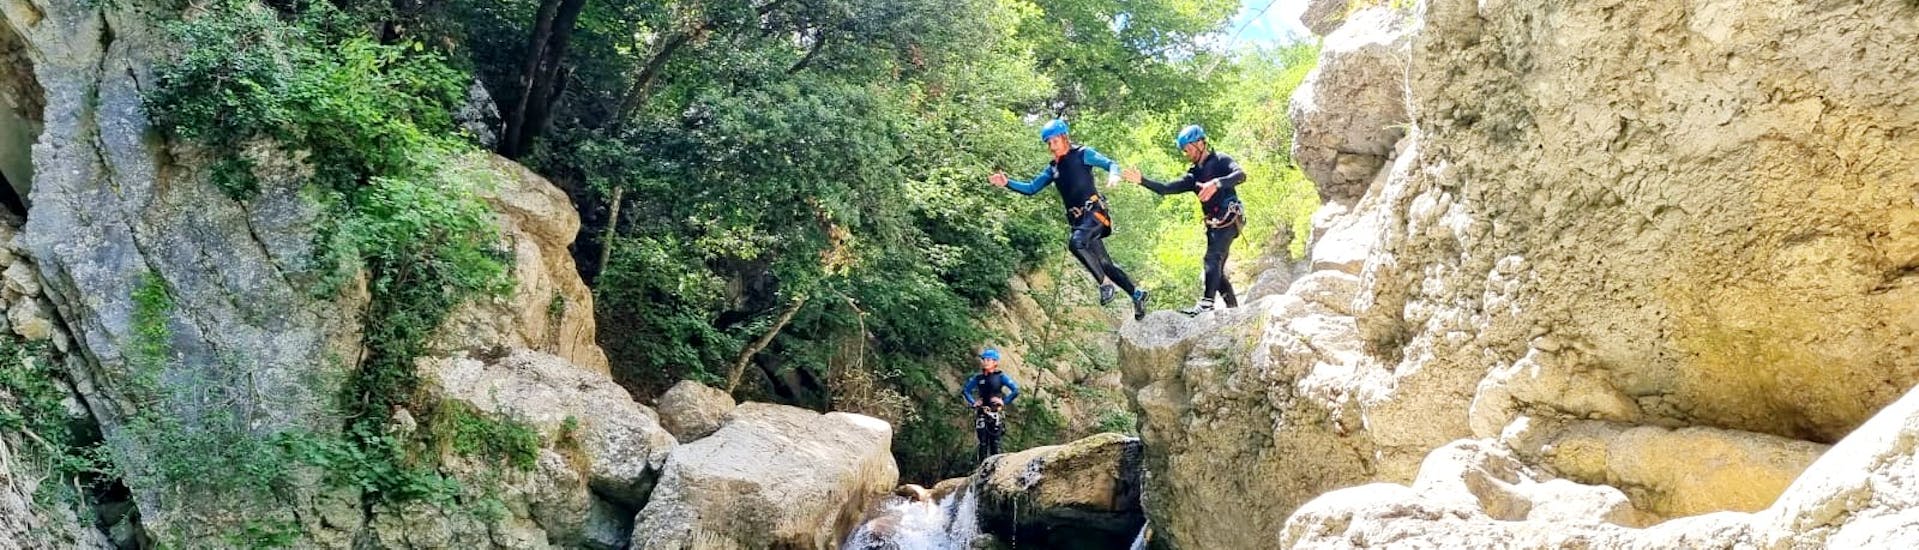 Leichte Canyoning-Tour in Gréolières - Gours du Ray.